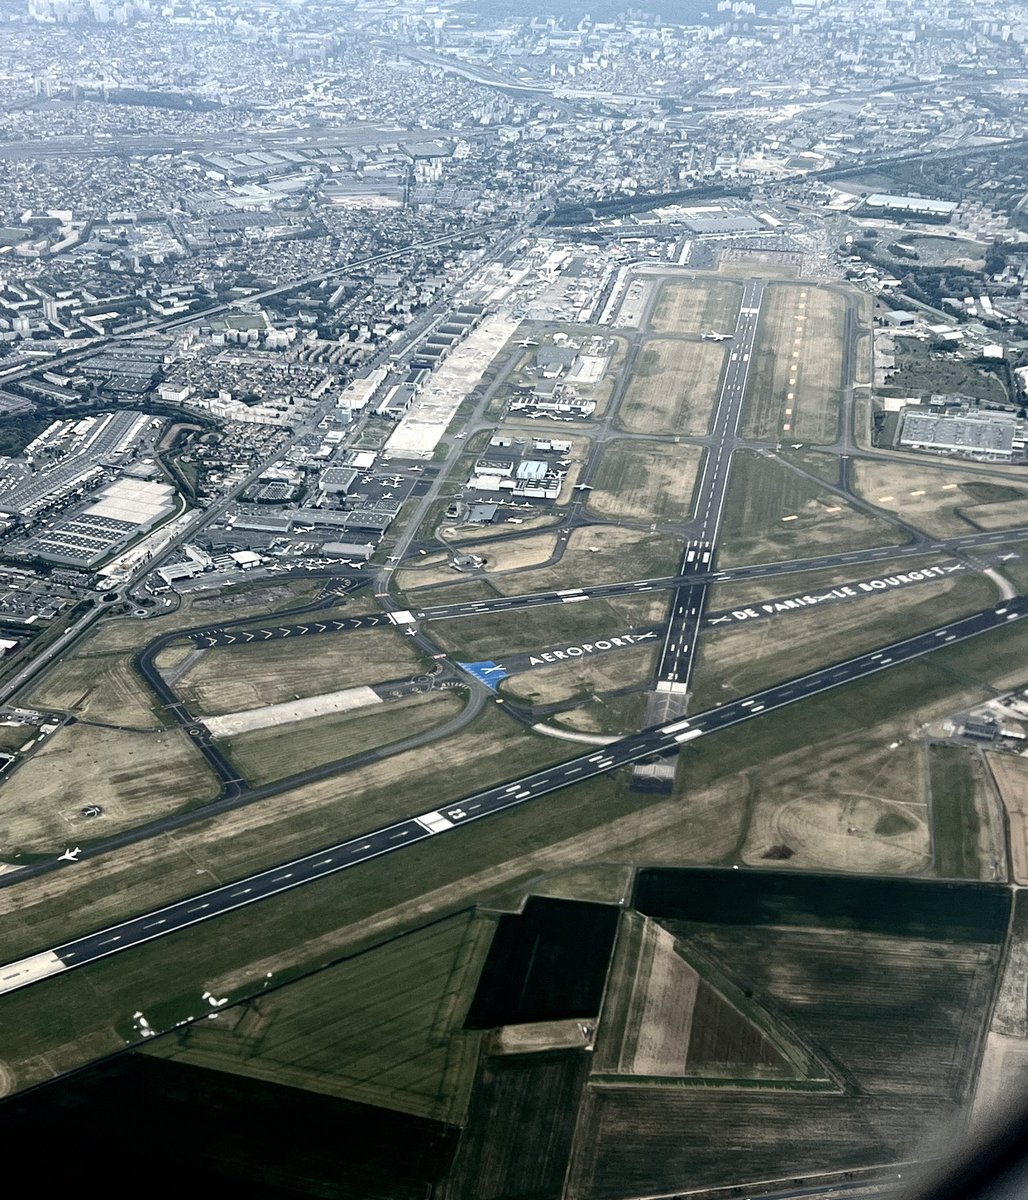 As I departed out of CDG yesterday evening on on my @AirFranceUK @AirbusintheUK A220 flight back home - we flew near #ParisAirShow @salondubourget - which gave me a great view from my window seat looking down over the airfield 😁✈️ #aviation #PAS23 #ParisAirShow2023